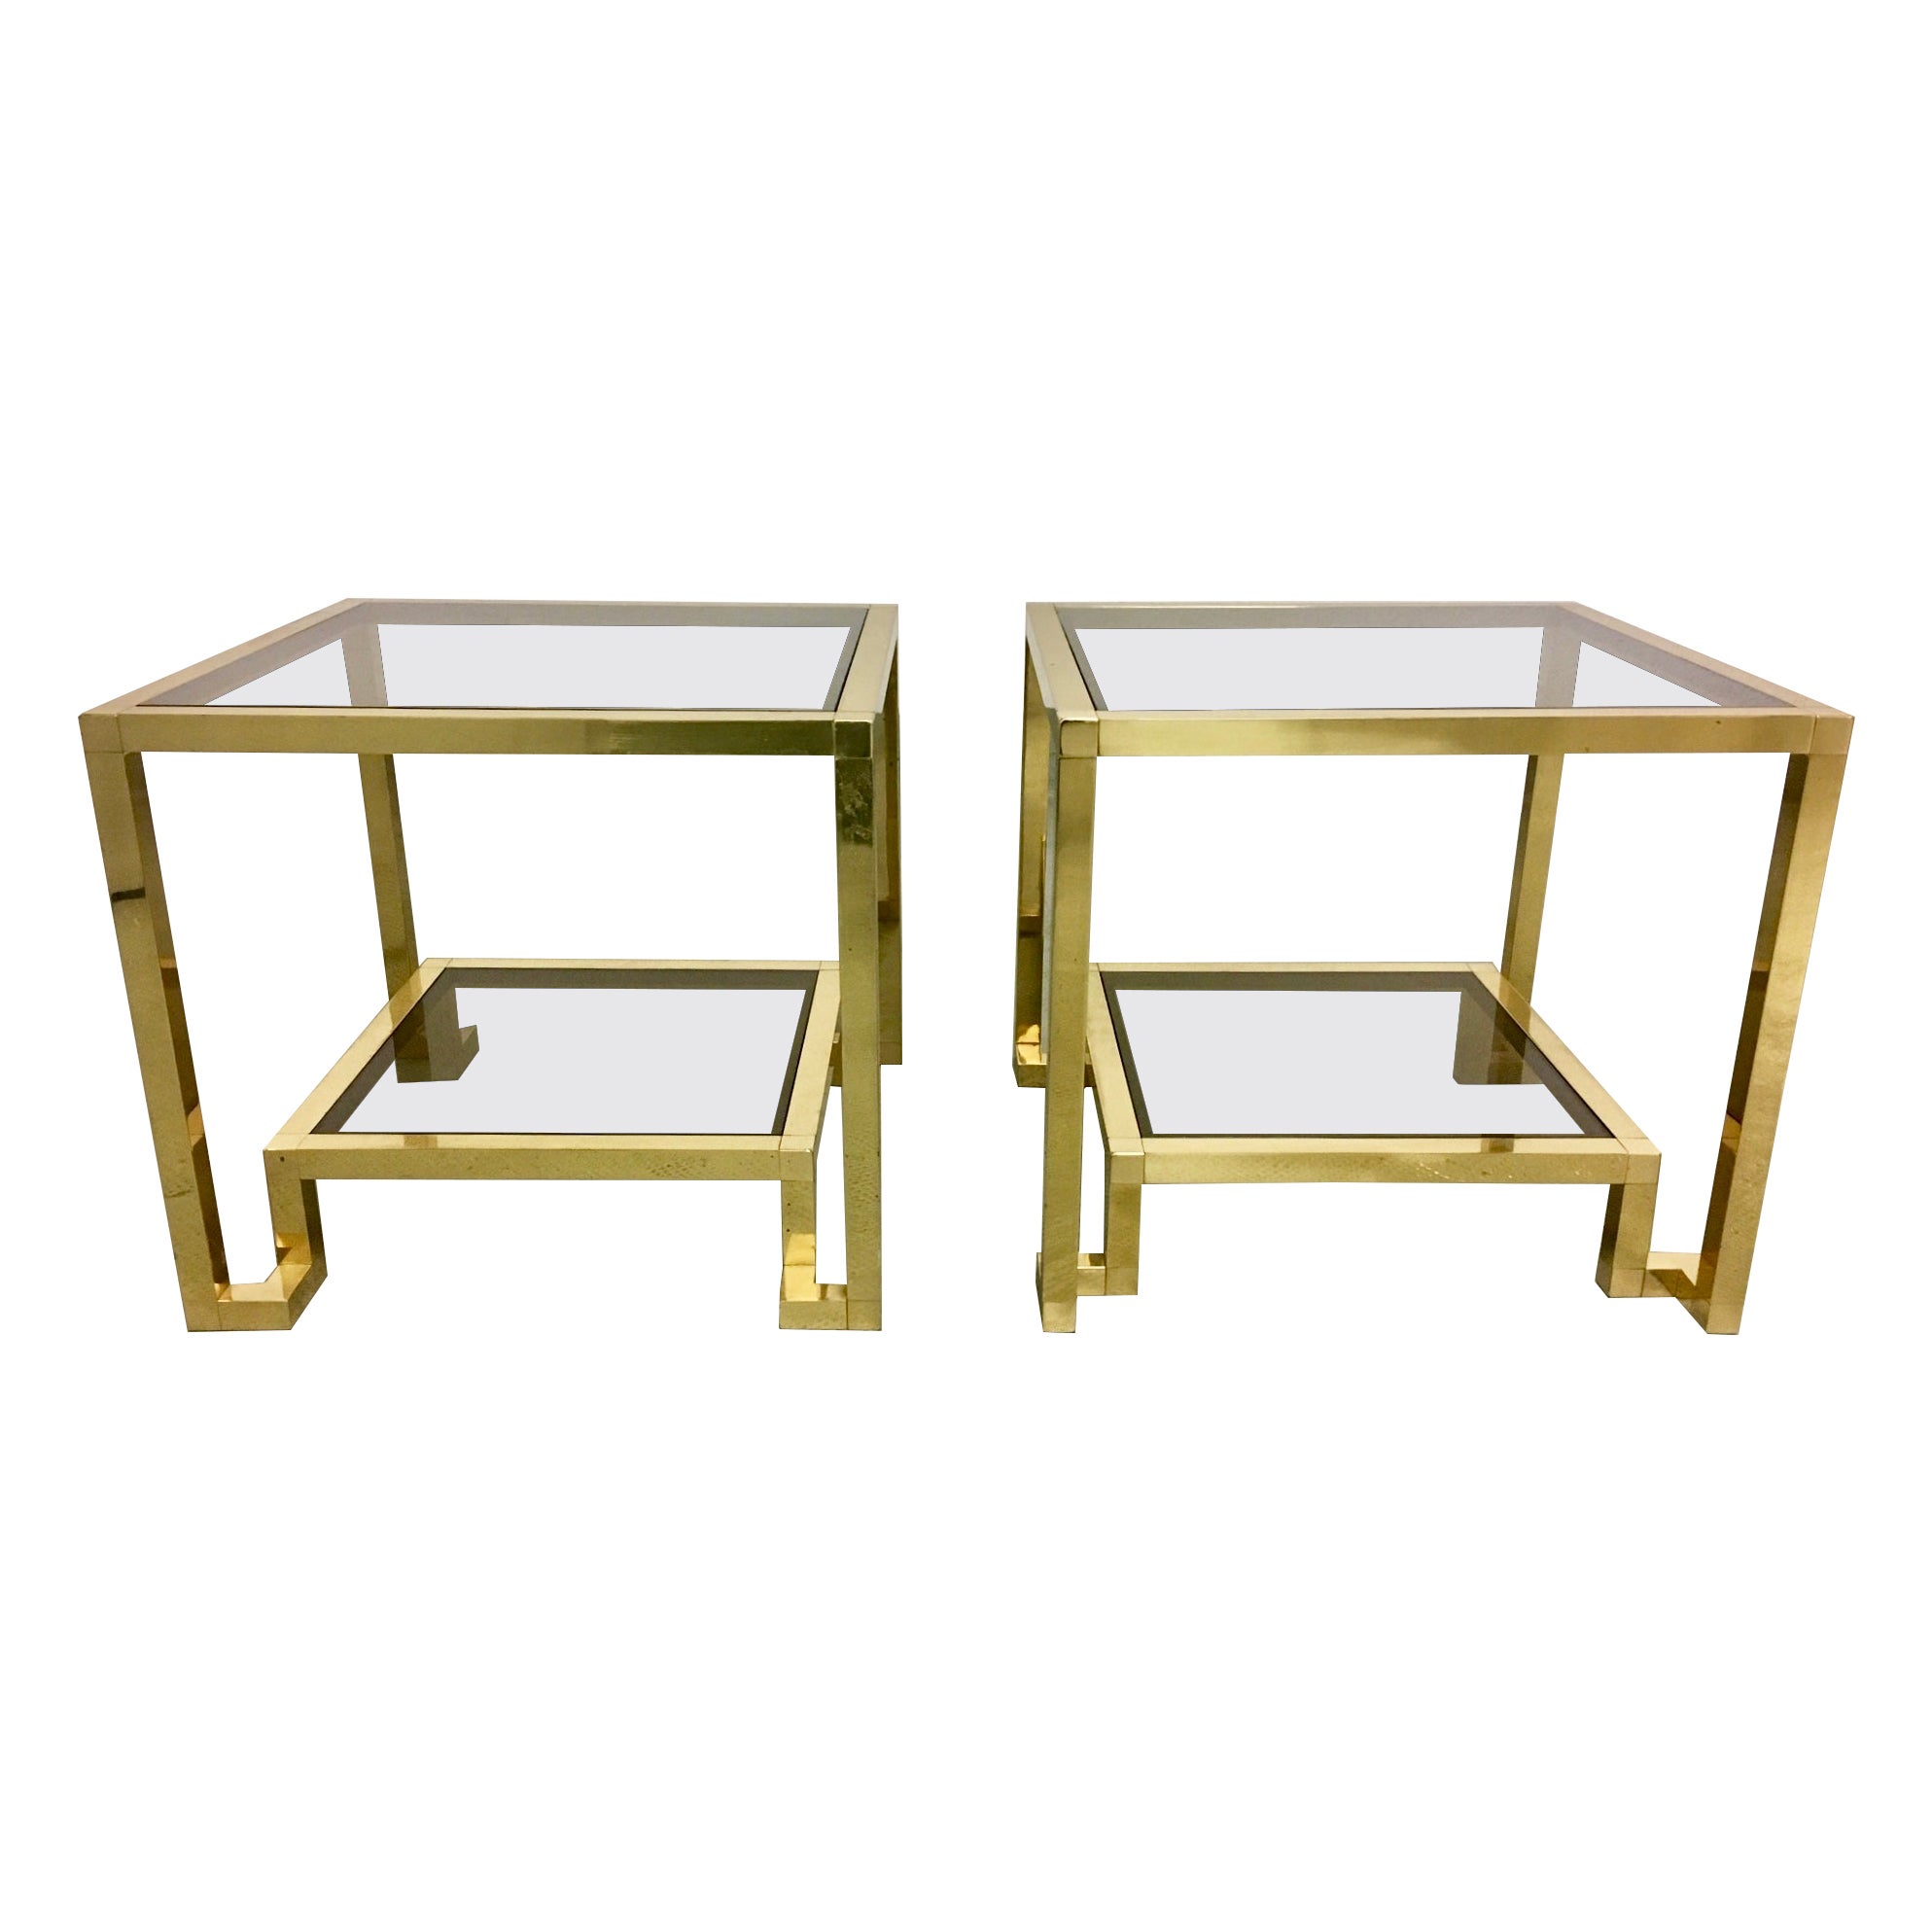 Pair of Brass & Glass Side Tables by Guy Lefèvre for Maison Jansen, France 1970s